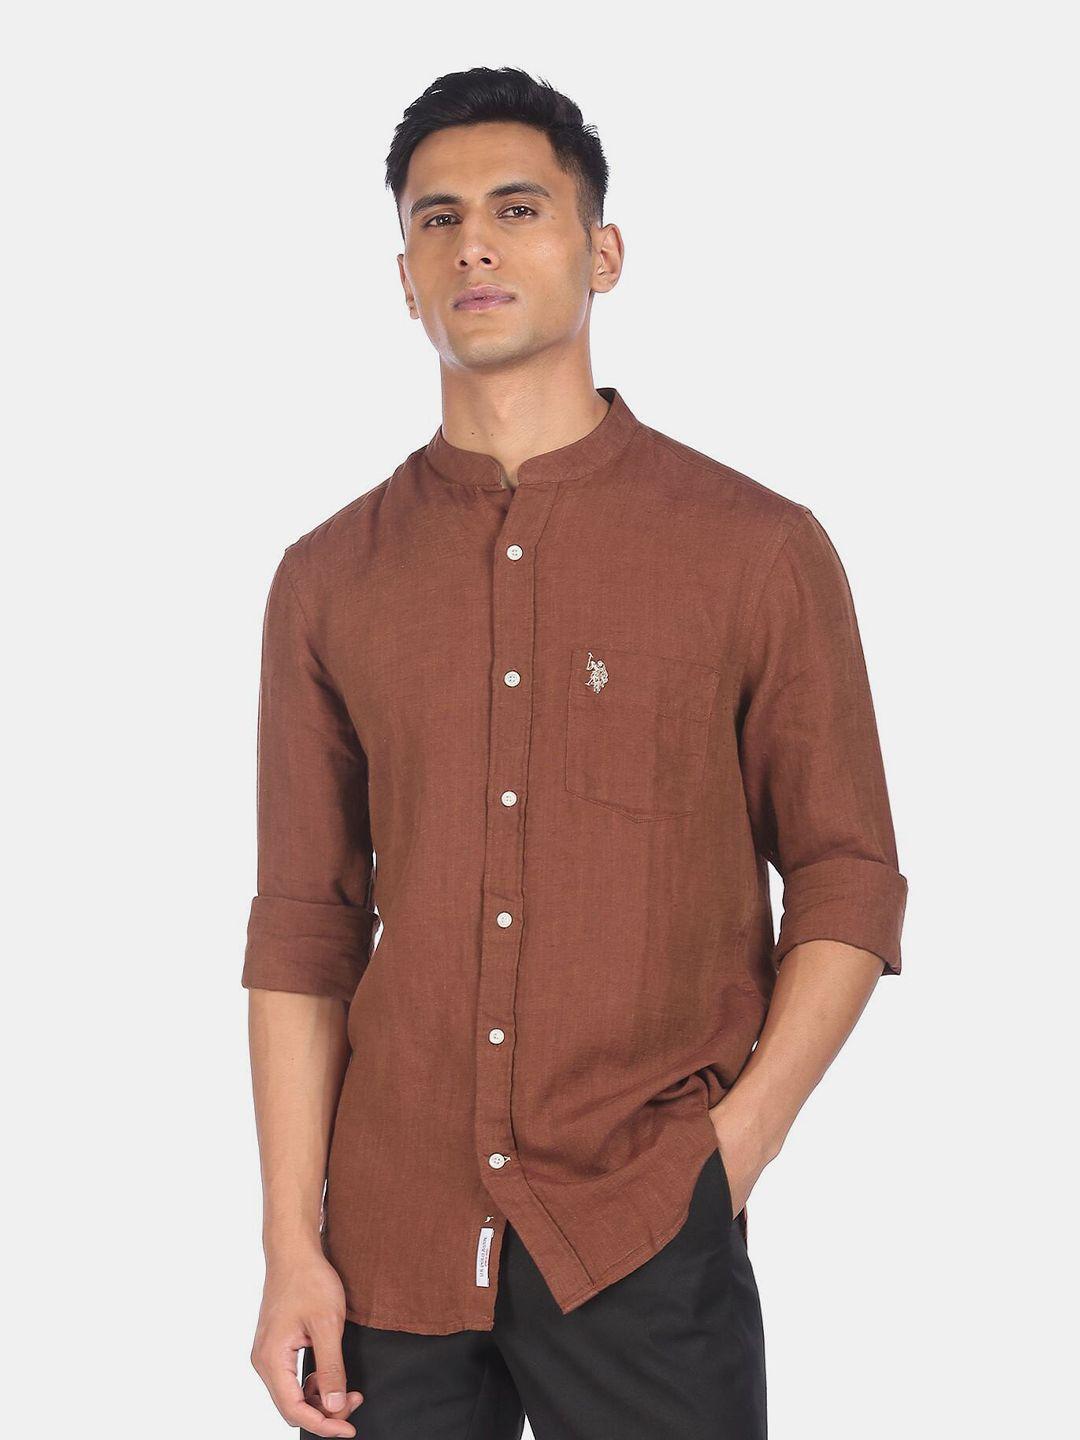 u.s. polo assn. men brown solid roll-up sleeves casual shirt